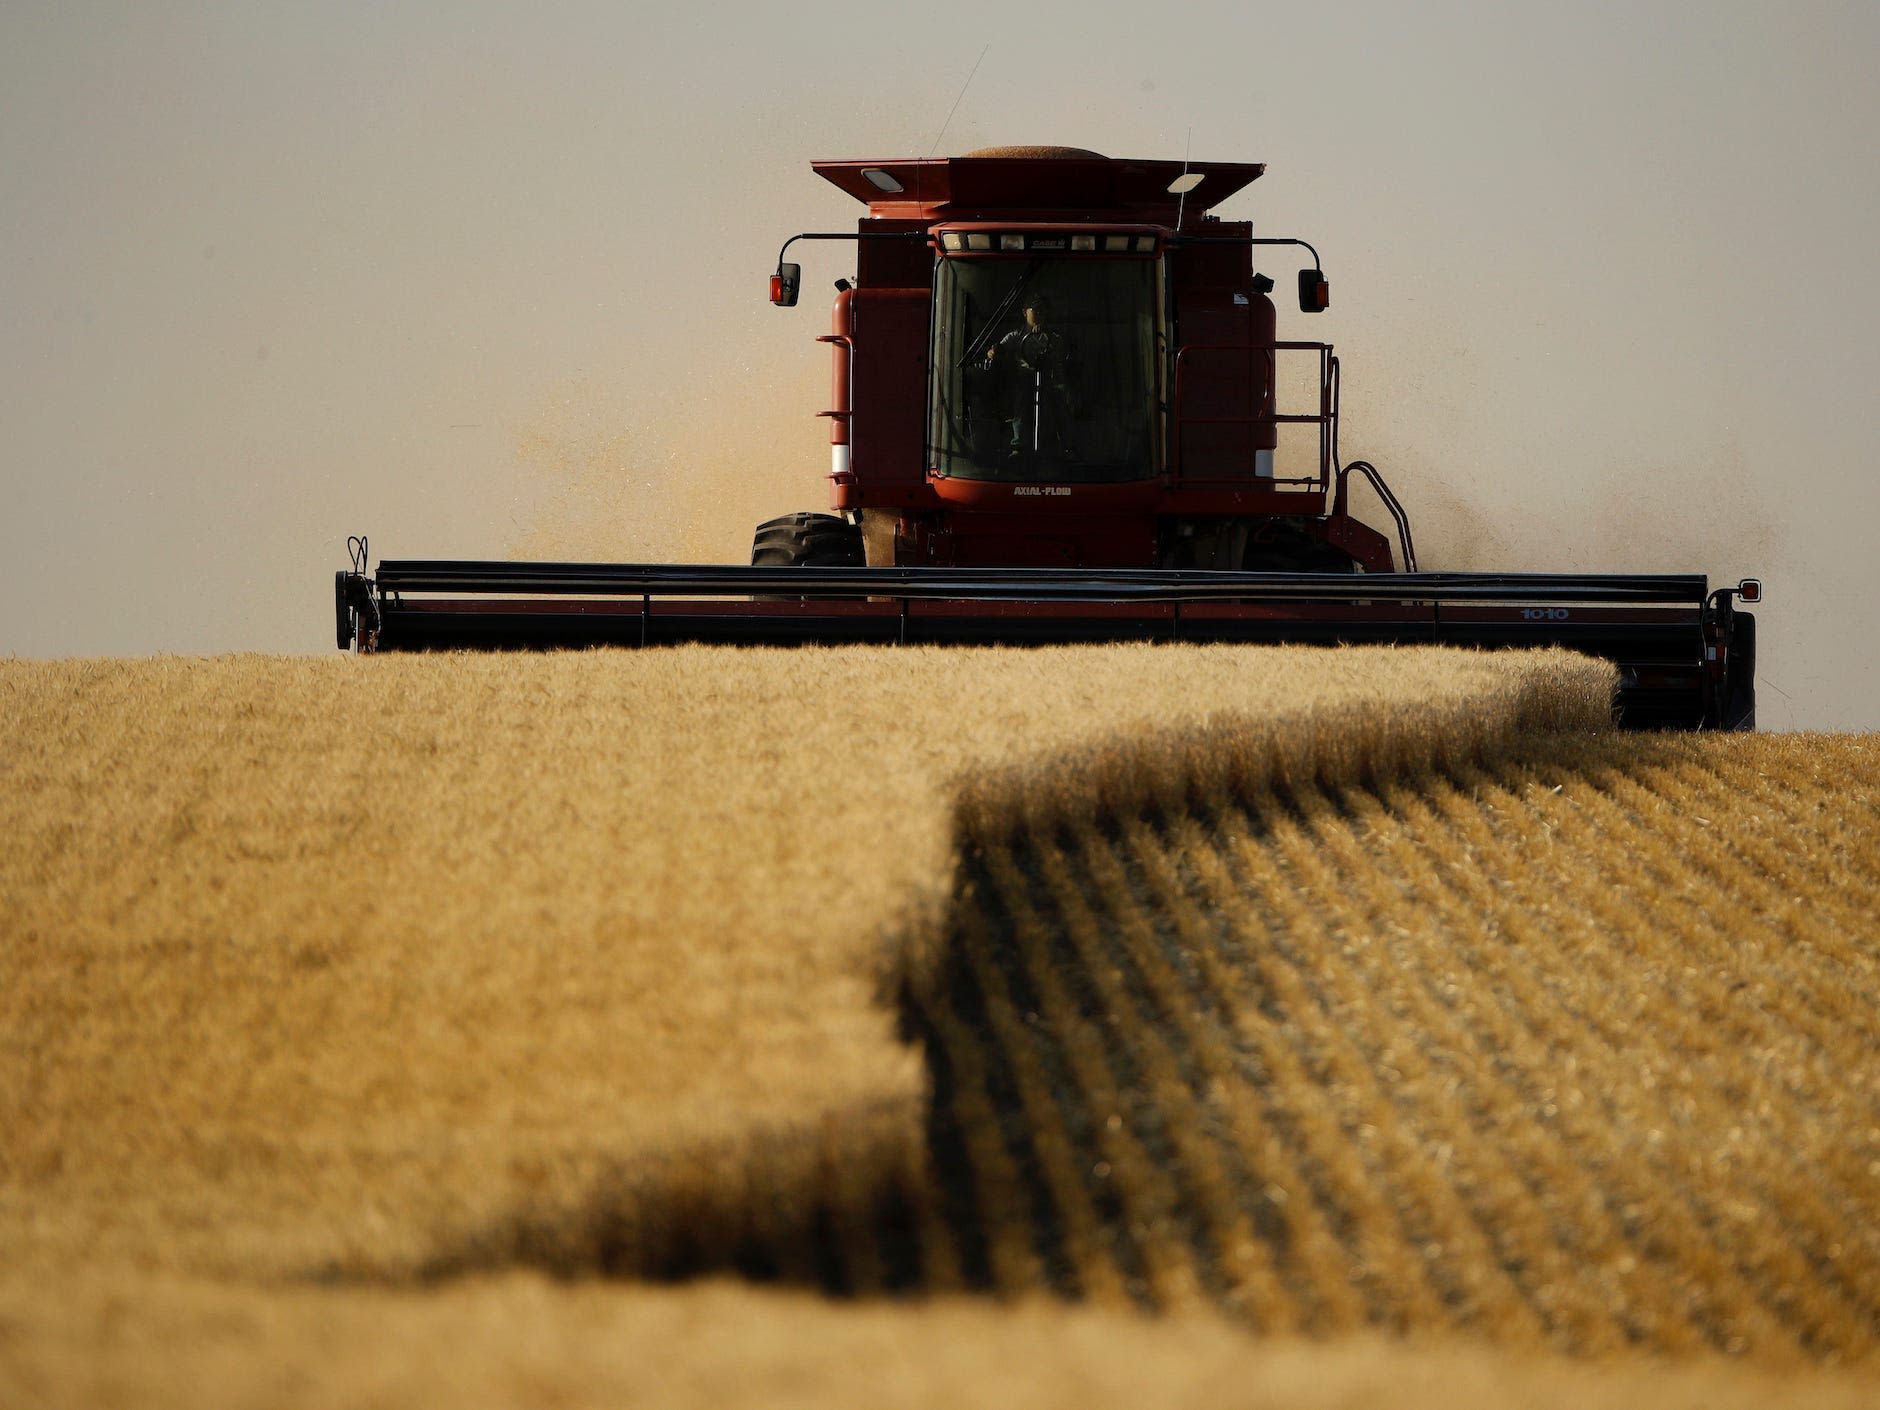 Wheat prices have surged to 8-month highs amid global conflict and extreme weather